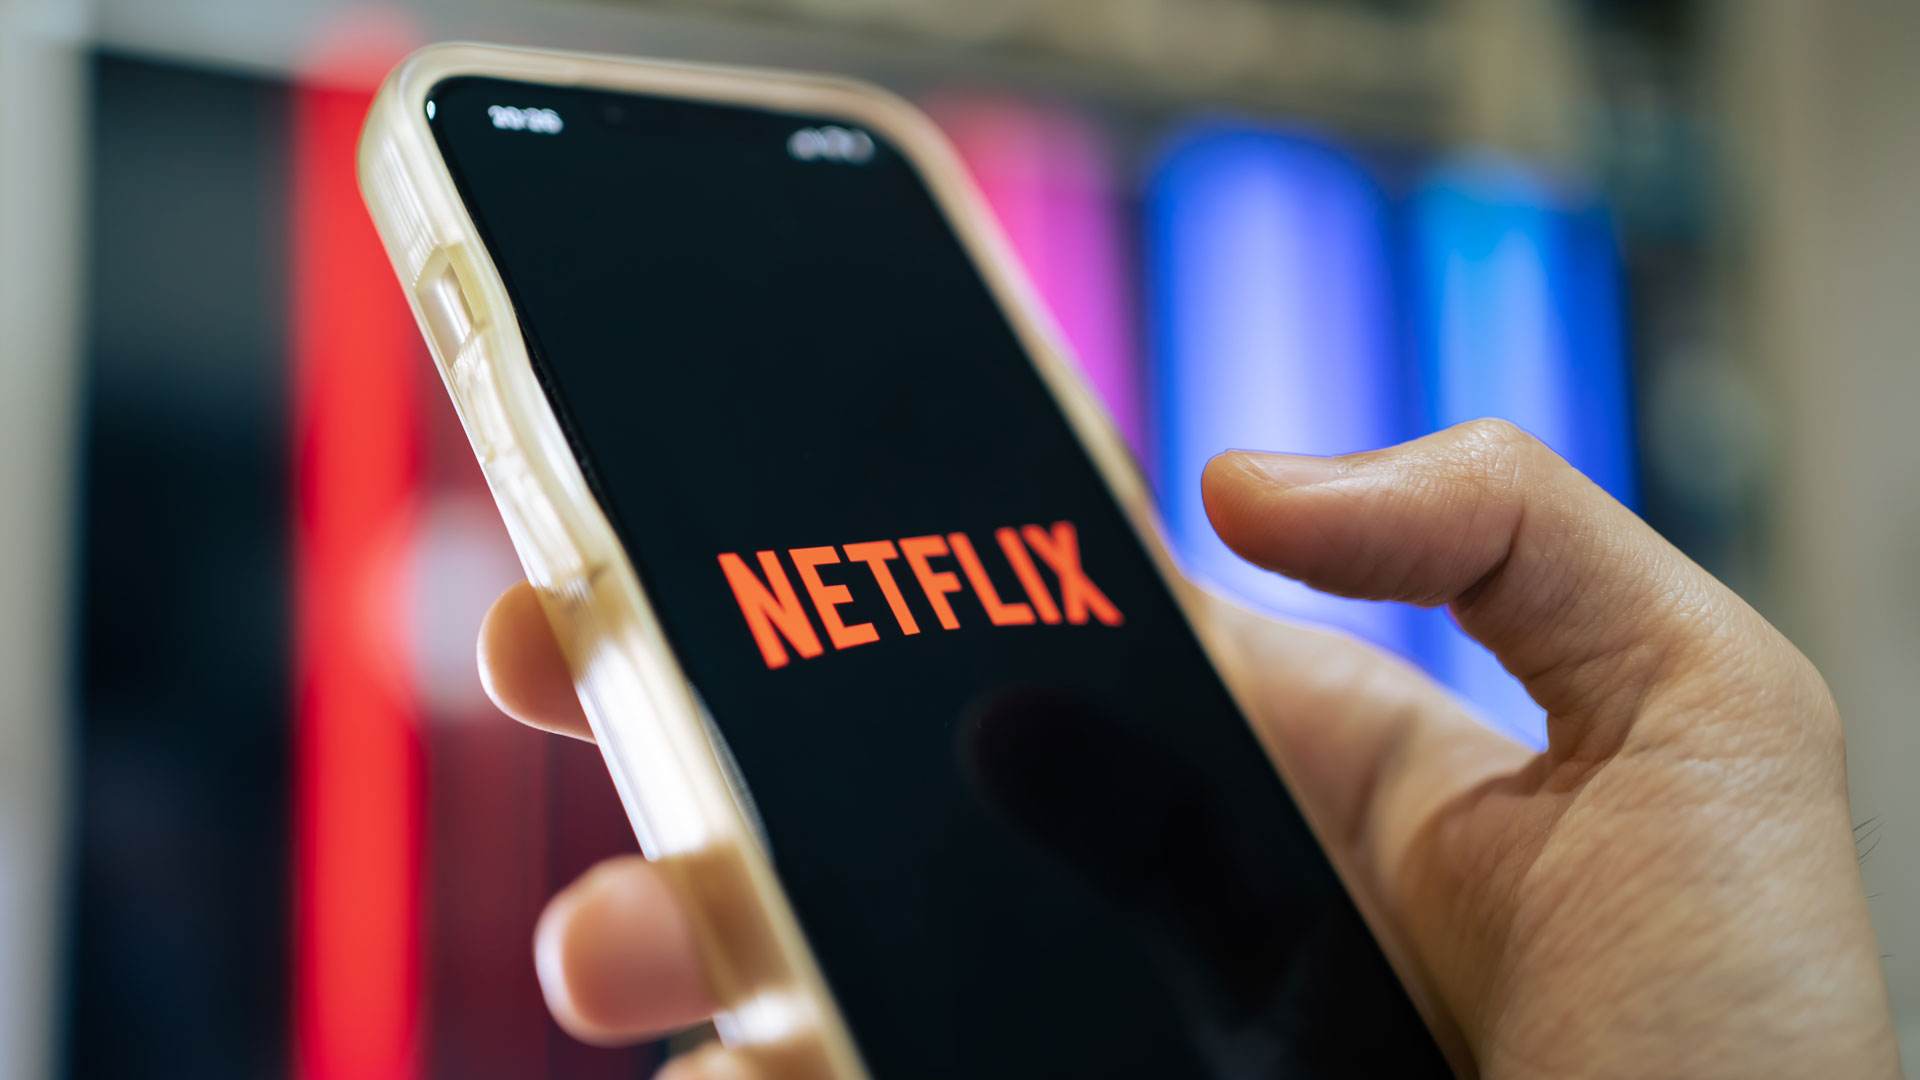 Netflix Users Threaten to Cancel as Prices Skyrocket – Are You Sick of the Constant Price Hikes?